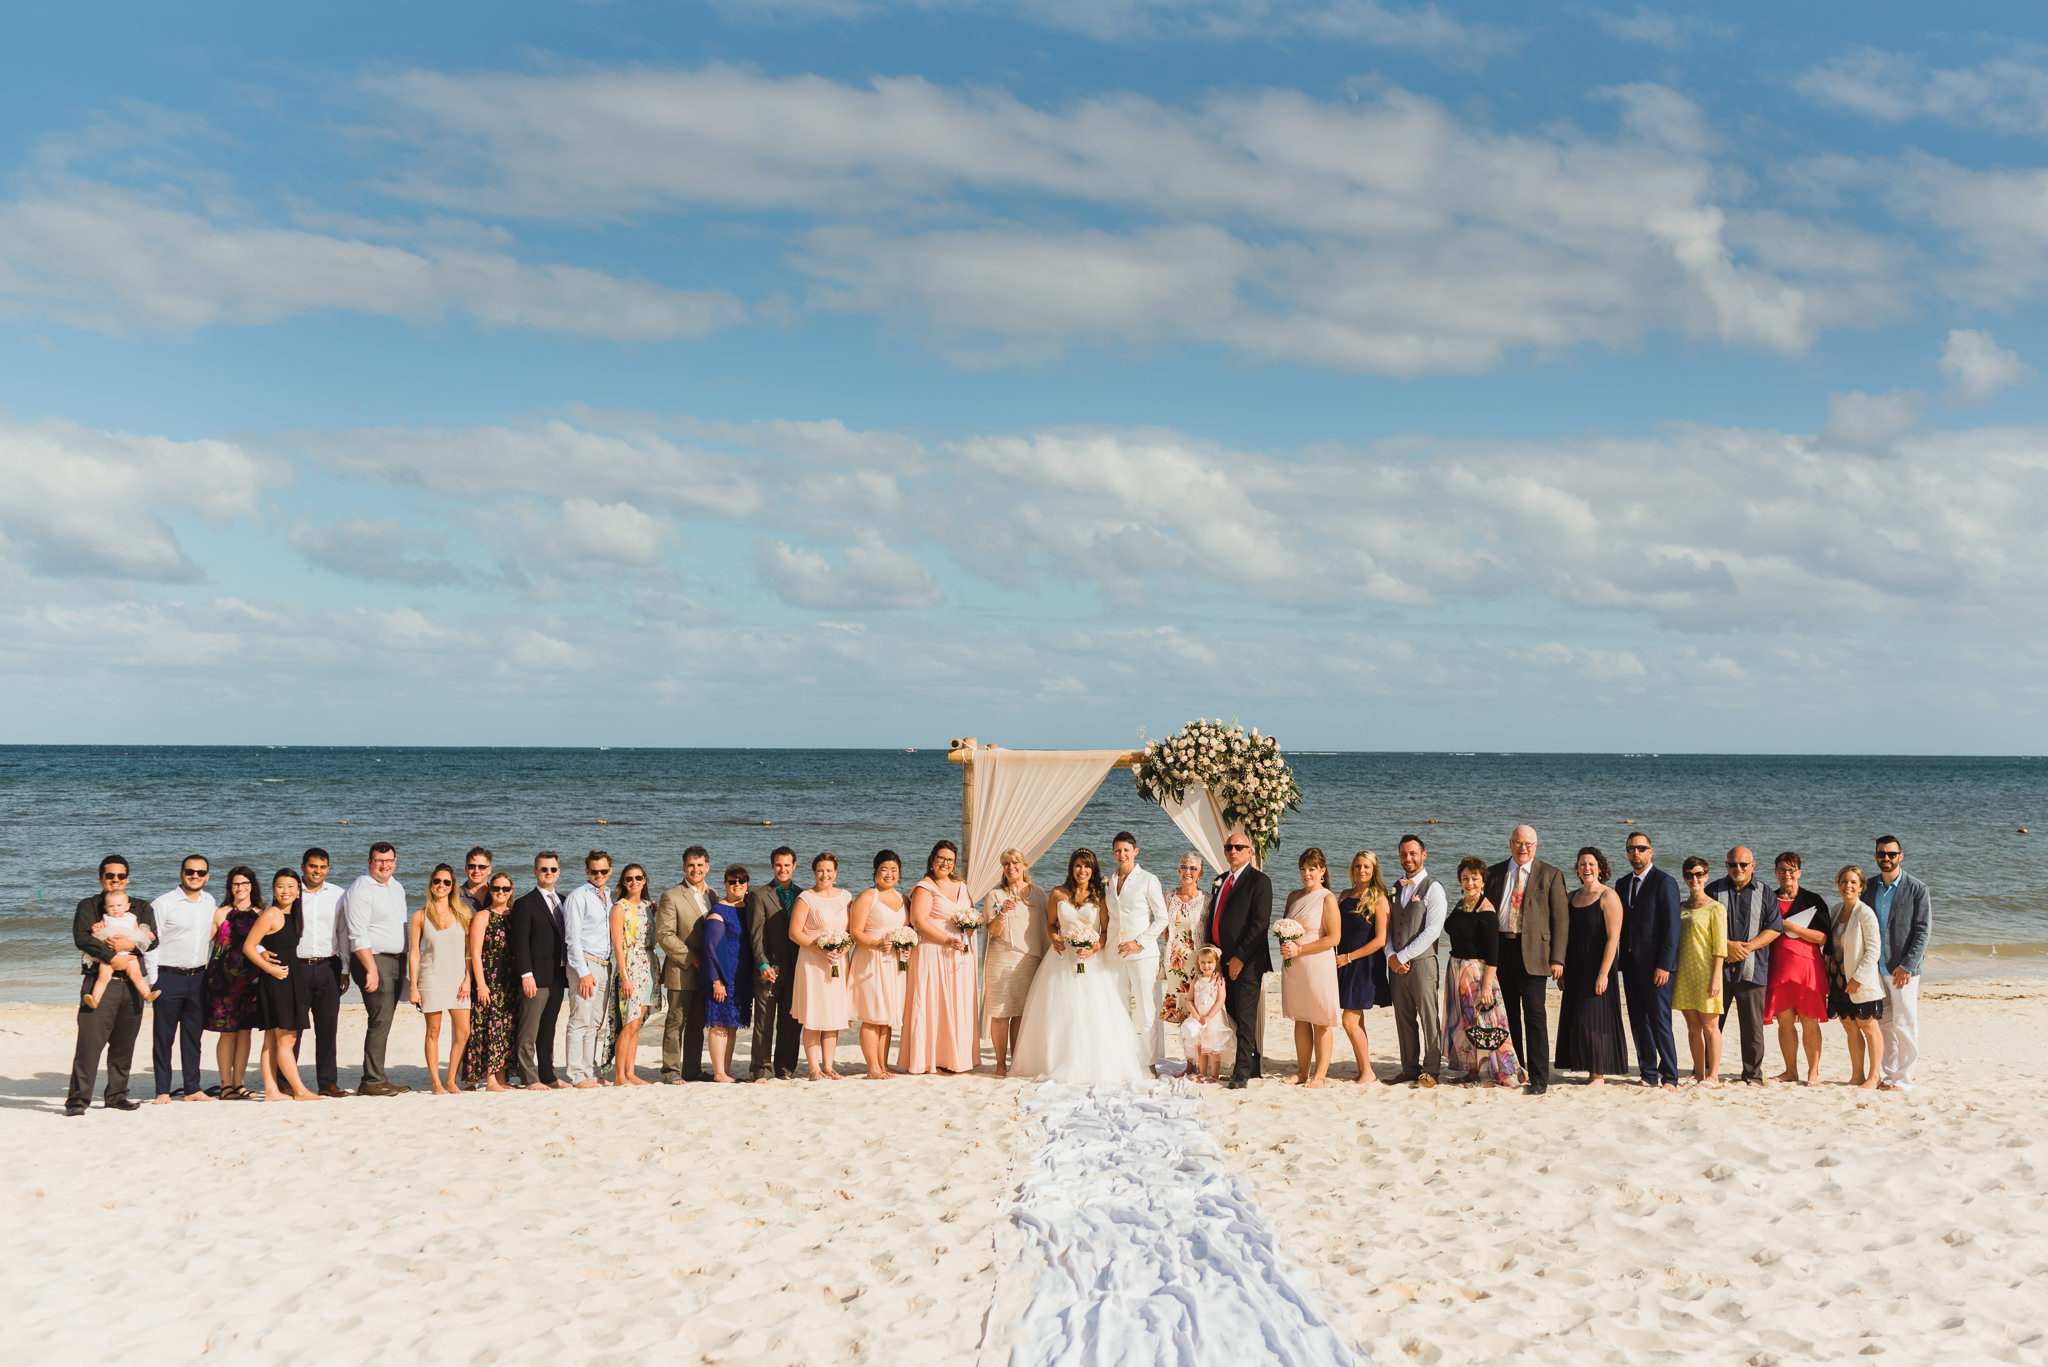 brides and their wedding guests lined up at alter in front of the ocean at Now Sapphire Resort in Mexico